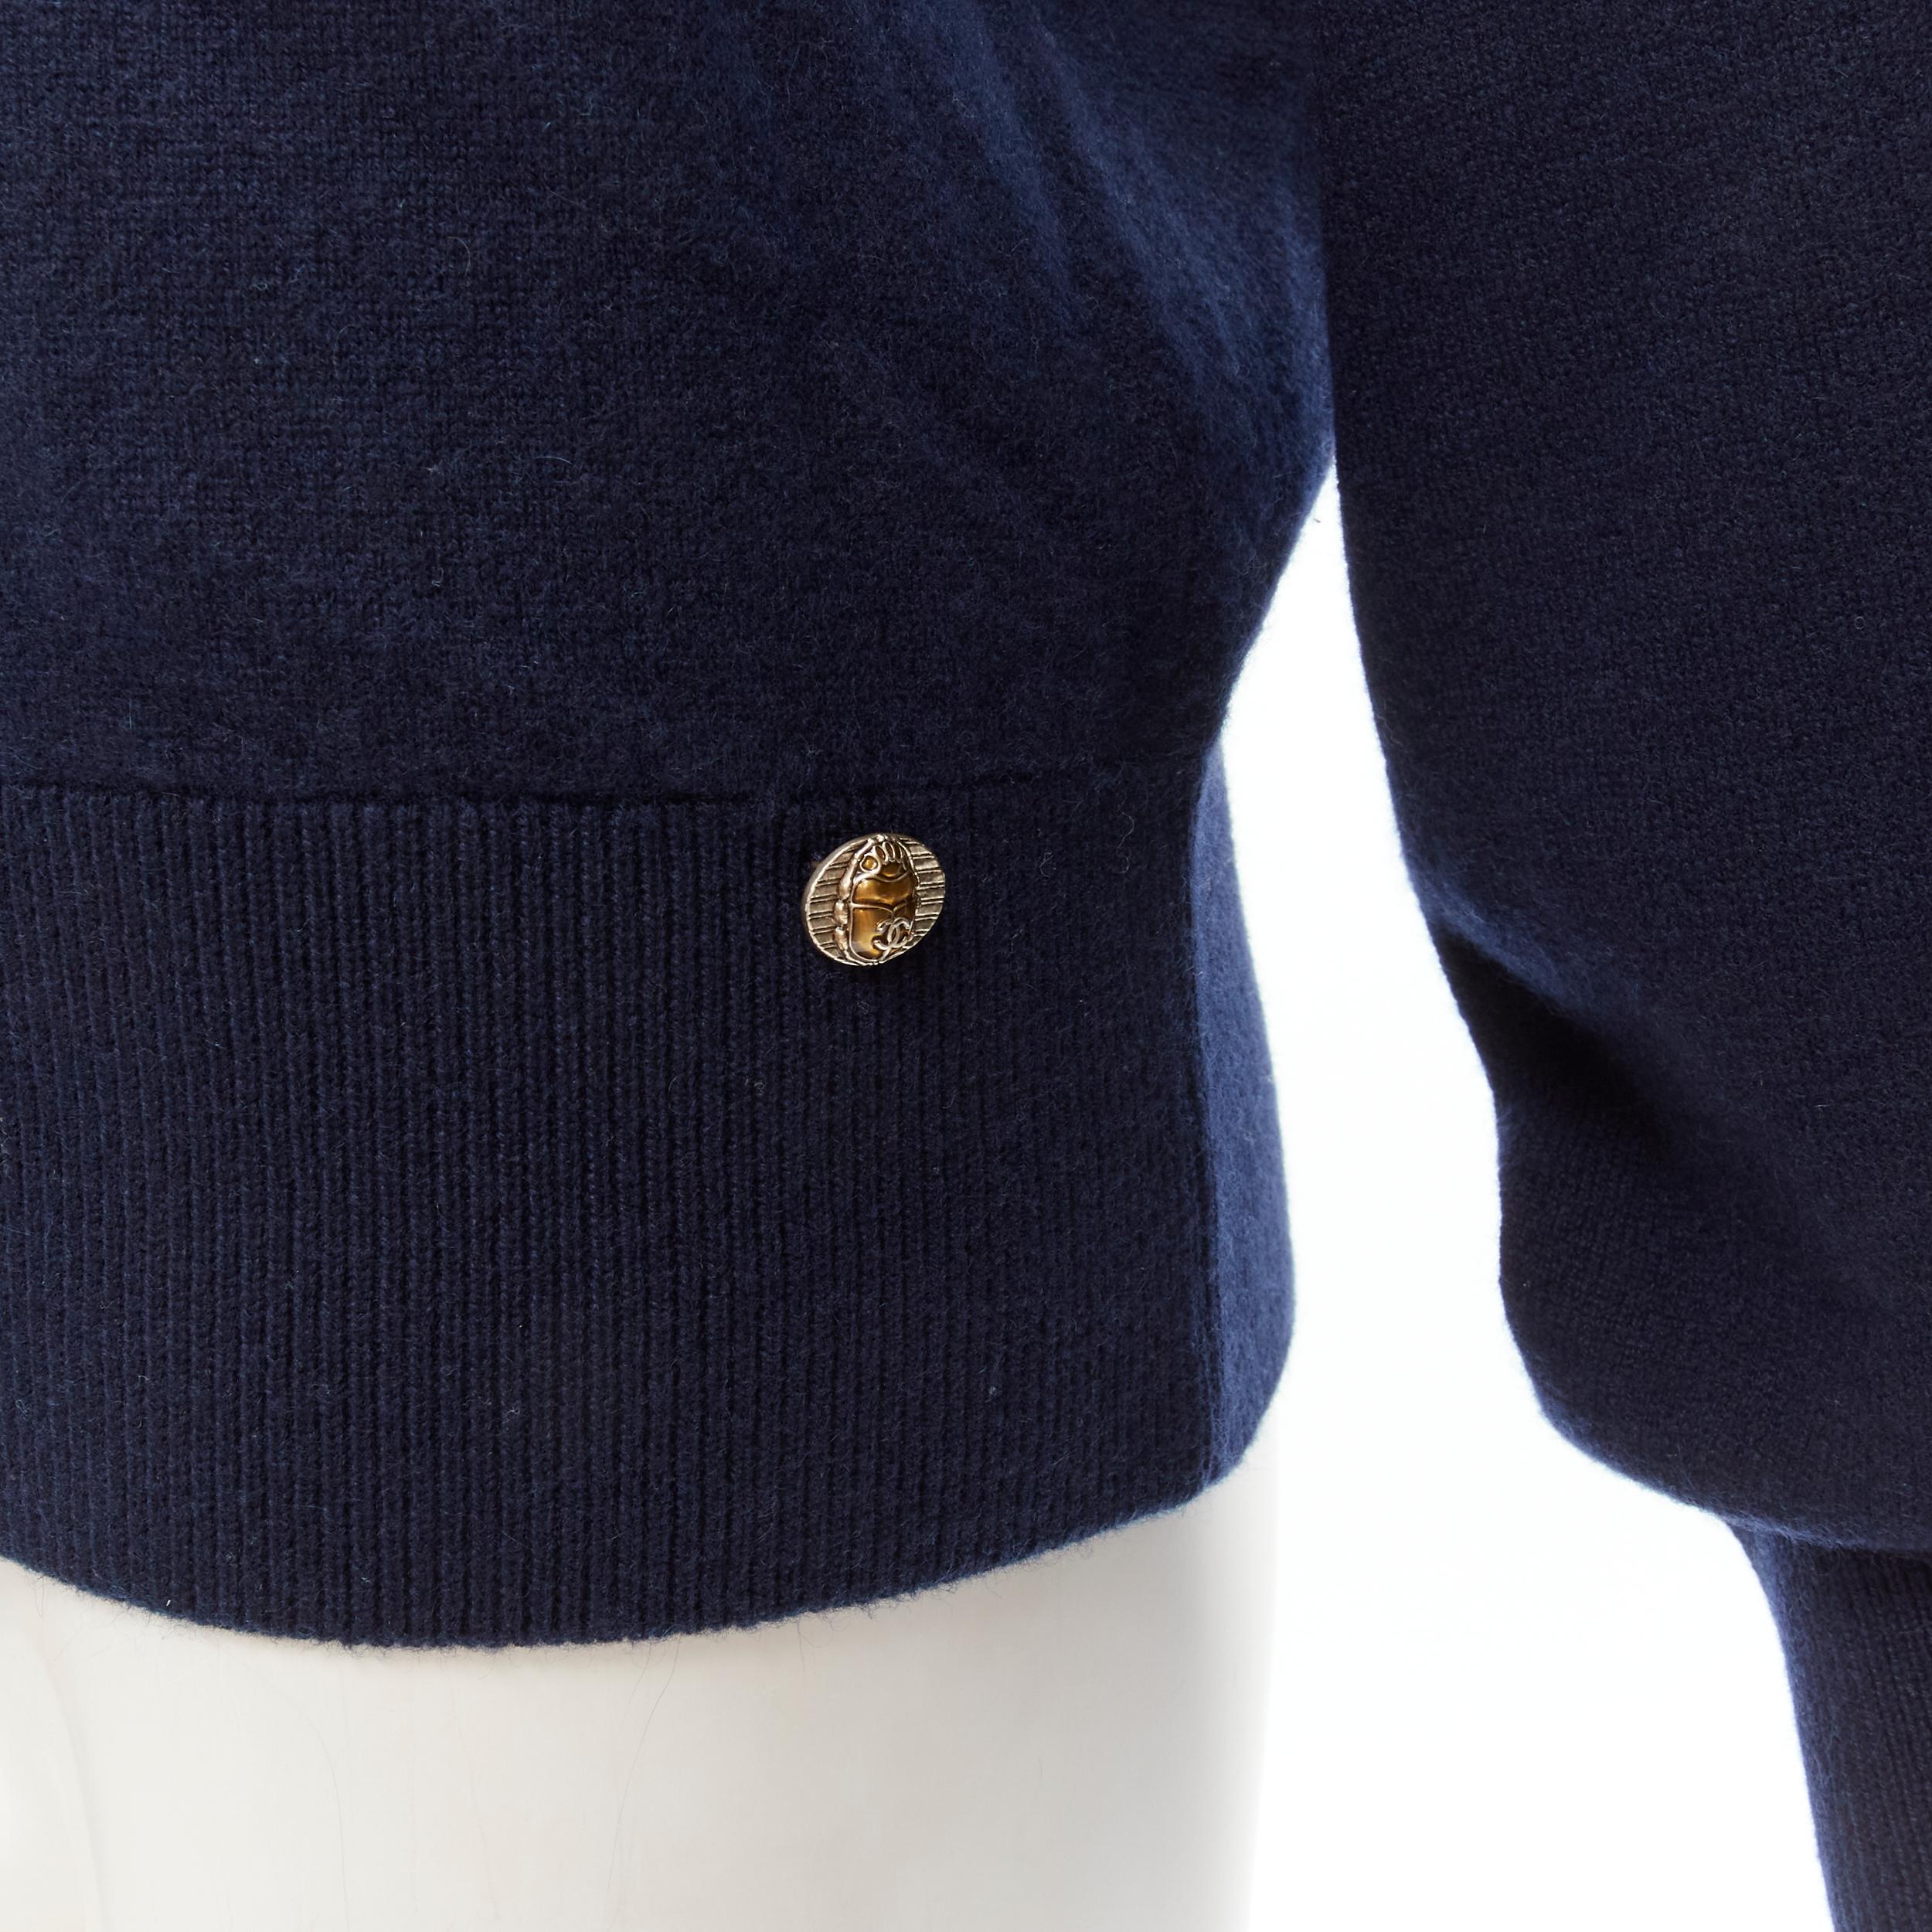 CHANEL 98% cashmere blend navy gold Egypt Hieroglypic pullover sweater FR36 S
Brand: Chanel
Material: Cashmere
Color: Navy
Pattern: Solid
Extra Detail: Gold-tone Scarab CC charm at front hem.
Made in: United Kingdom

CONDITION:
Condition: Excellent,